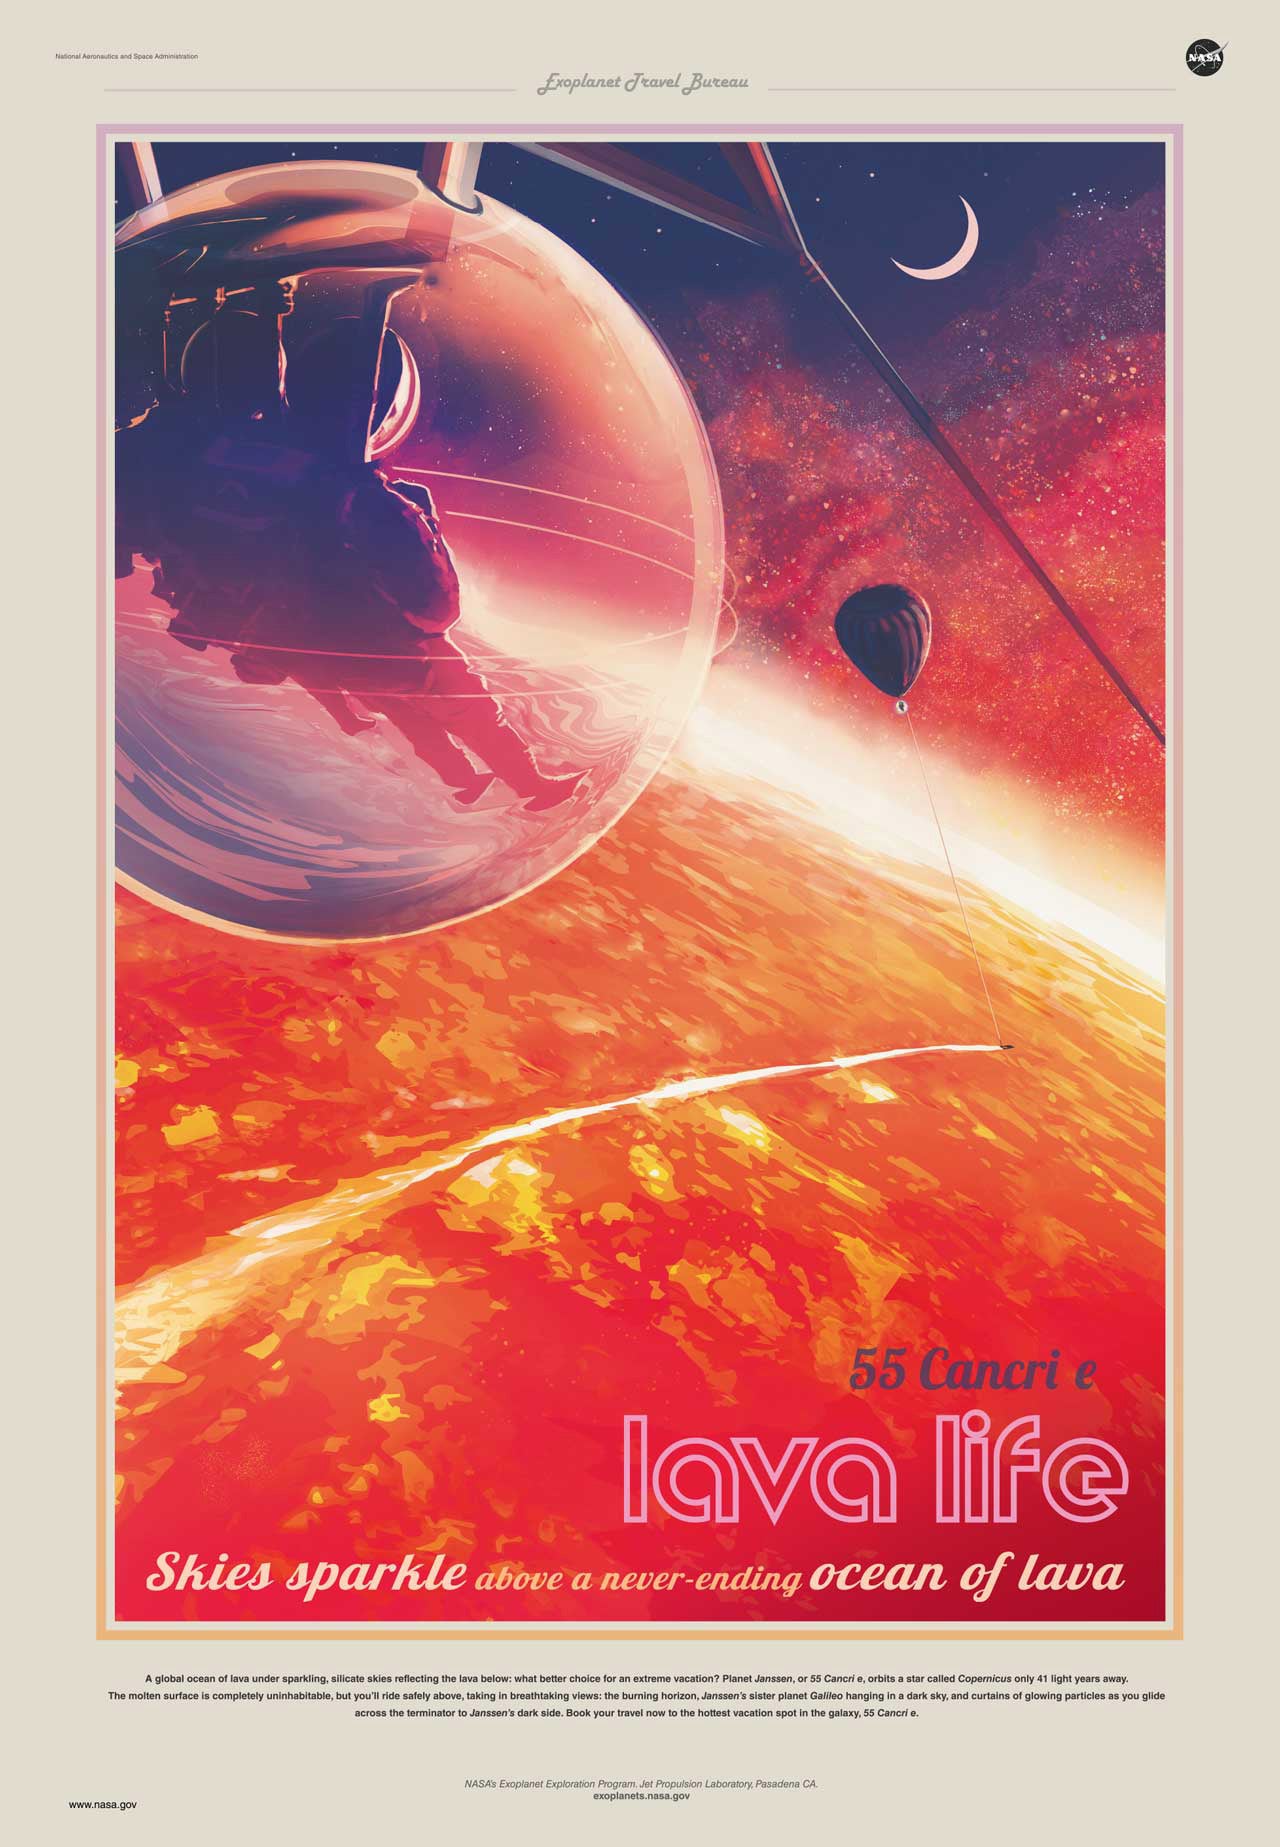 Poster art depicting a visit to the exoplanet lava world 55 Cancri 3e